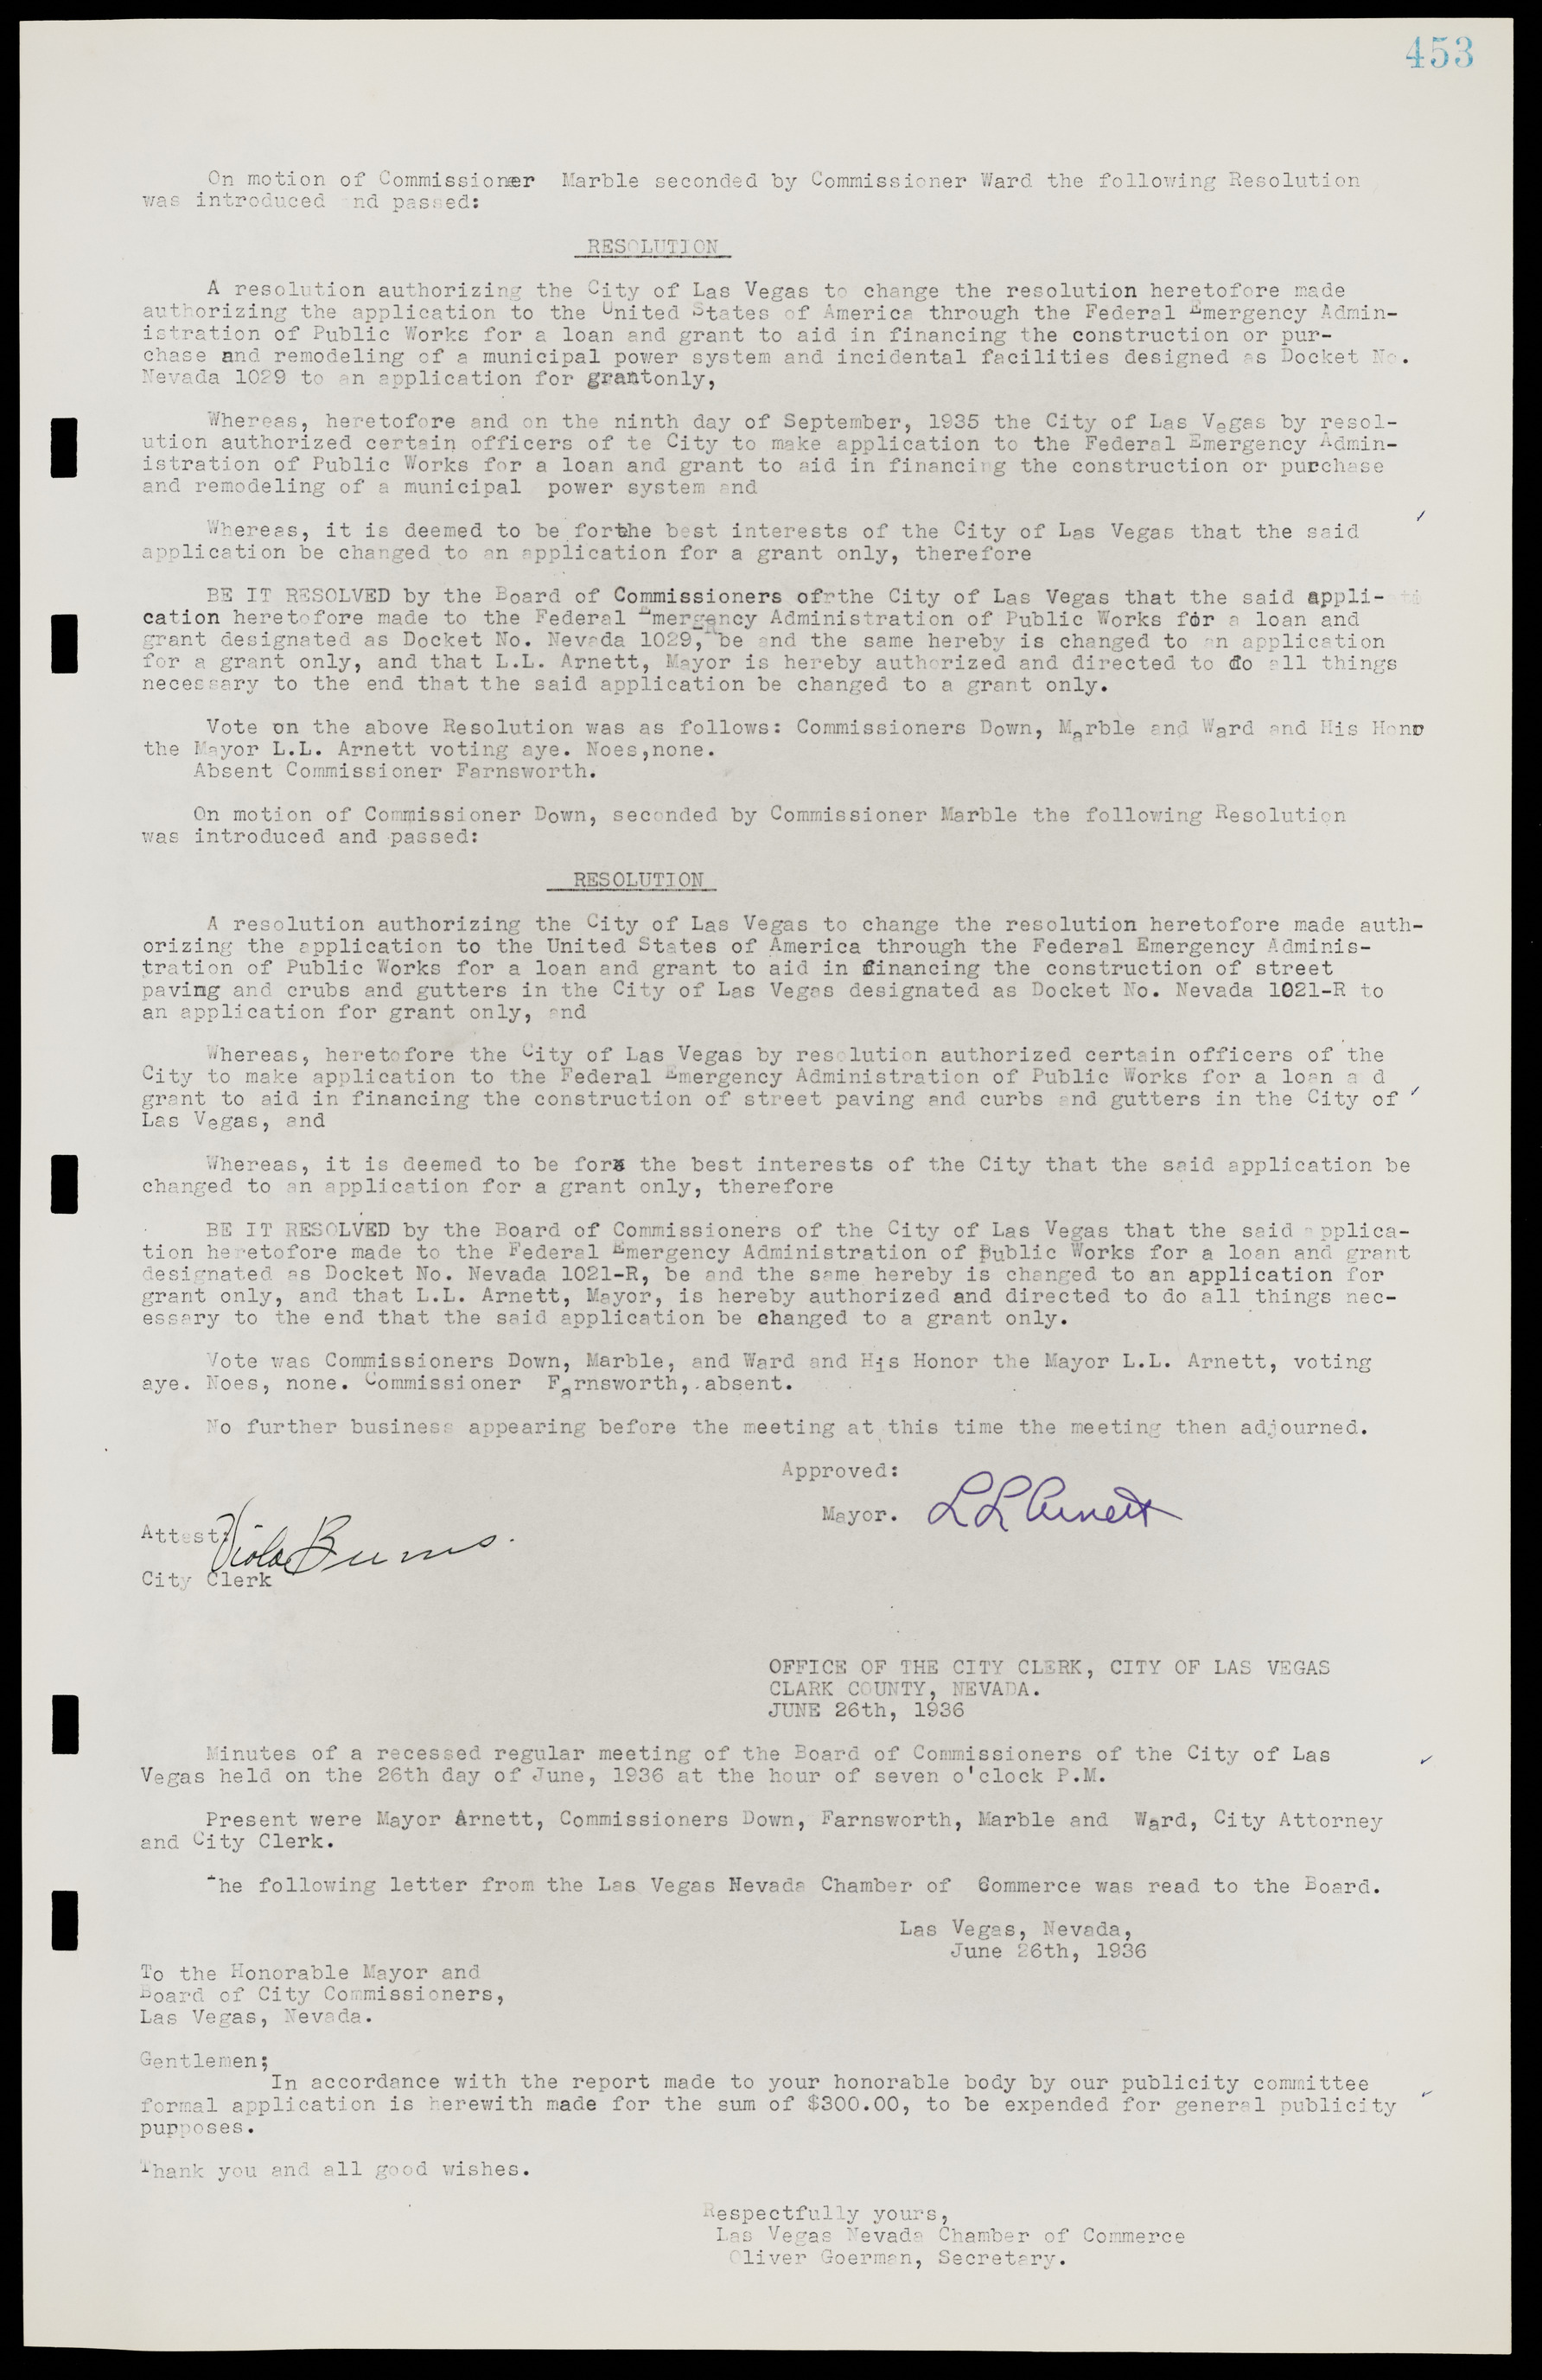 Las Vegas City Commission Minutes, May 14, 1929 to February 11, 1937, lvc000003-460